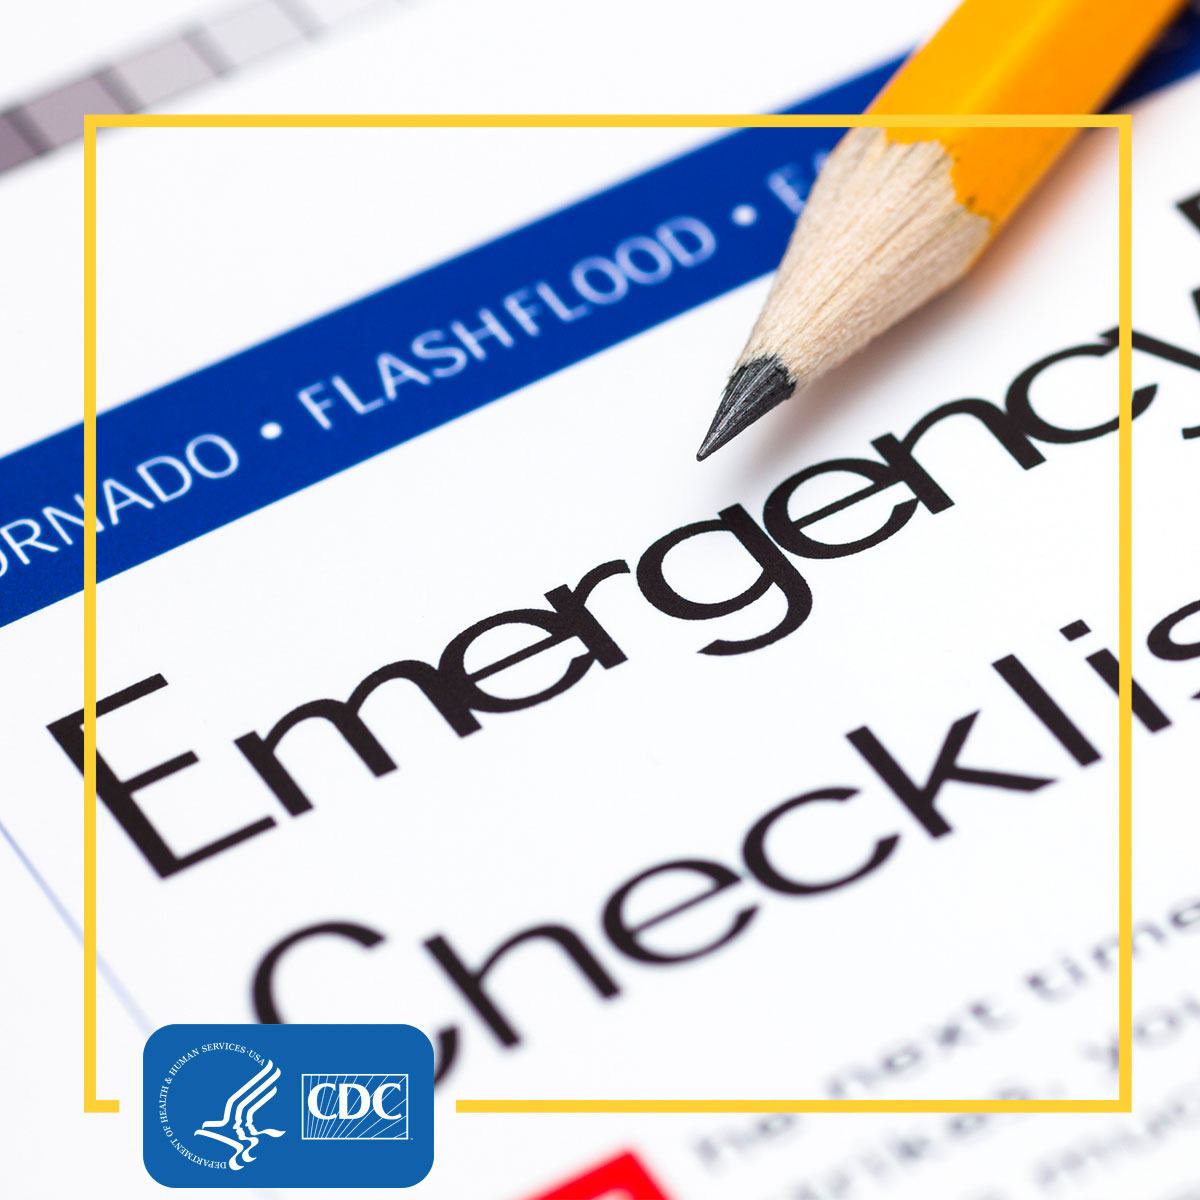 Plan for emergencies with a diabetes care kit. Your kit should include supplies for 1-2 weeks like: 
✔️ Insulin, syringes, &/or pills 
✔️Glucose kits
✔️ Insulin pump supplies
✔️Ketone strips 
✔️Alcohol wipes

Learn more: bit.ly/3Rn9TGk

#NPM2022 #PrepYourHealth